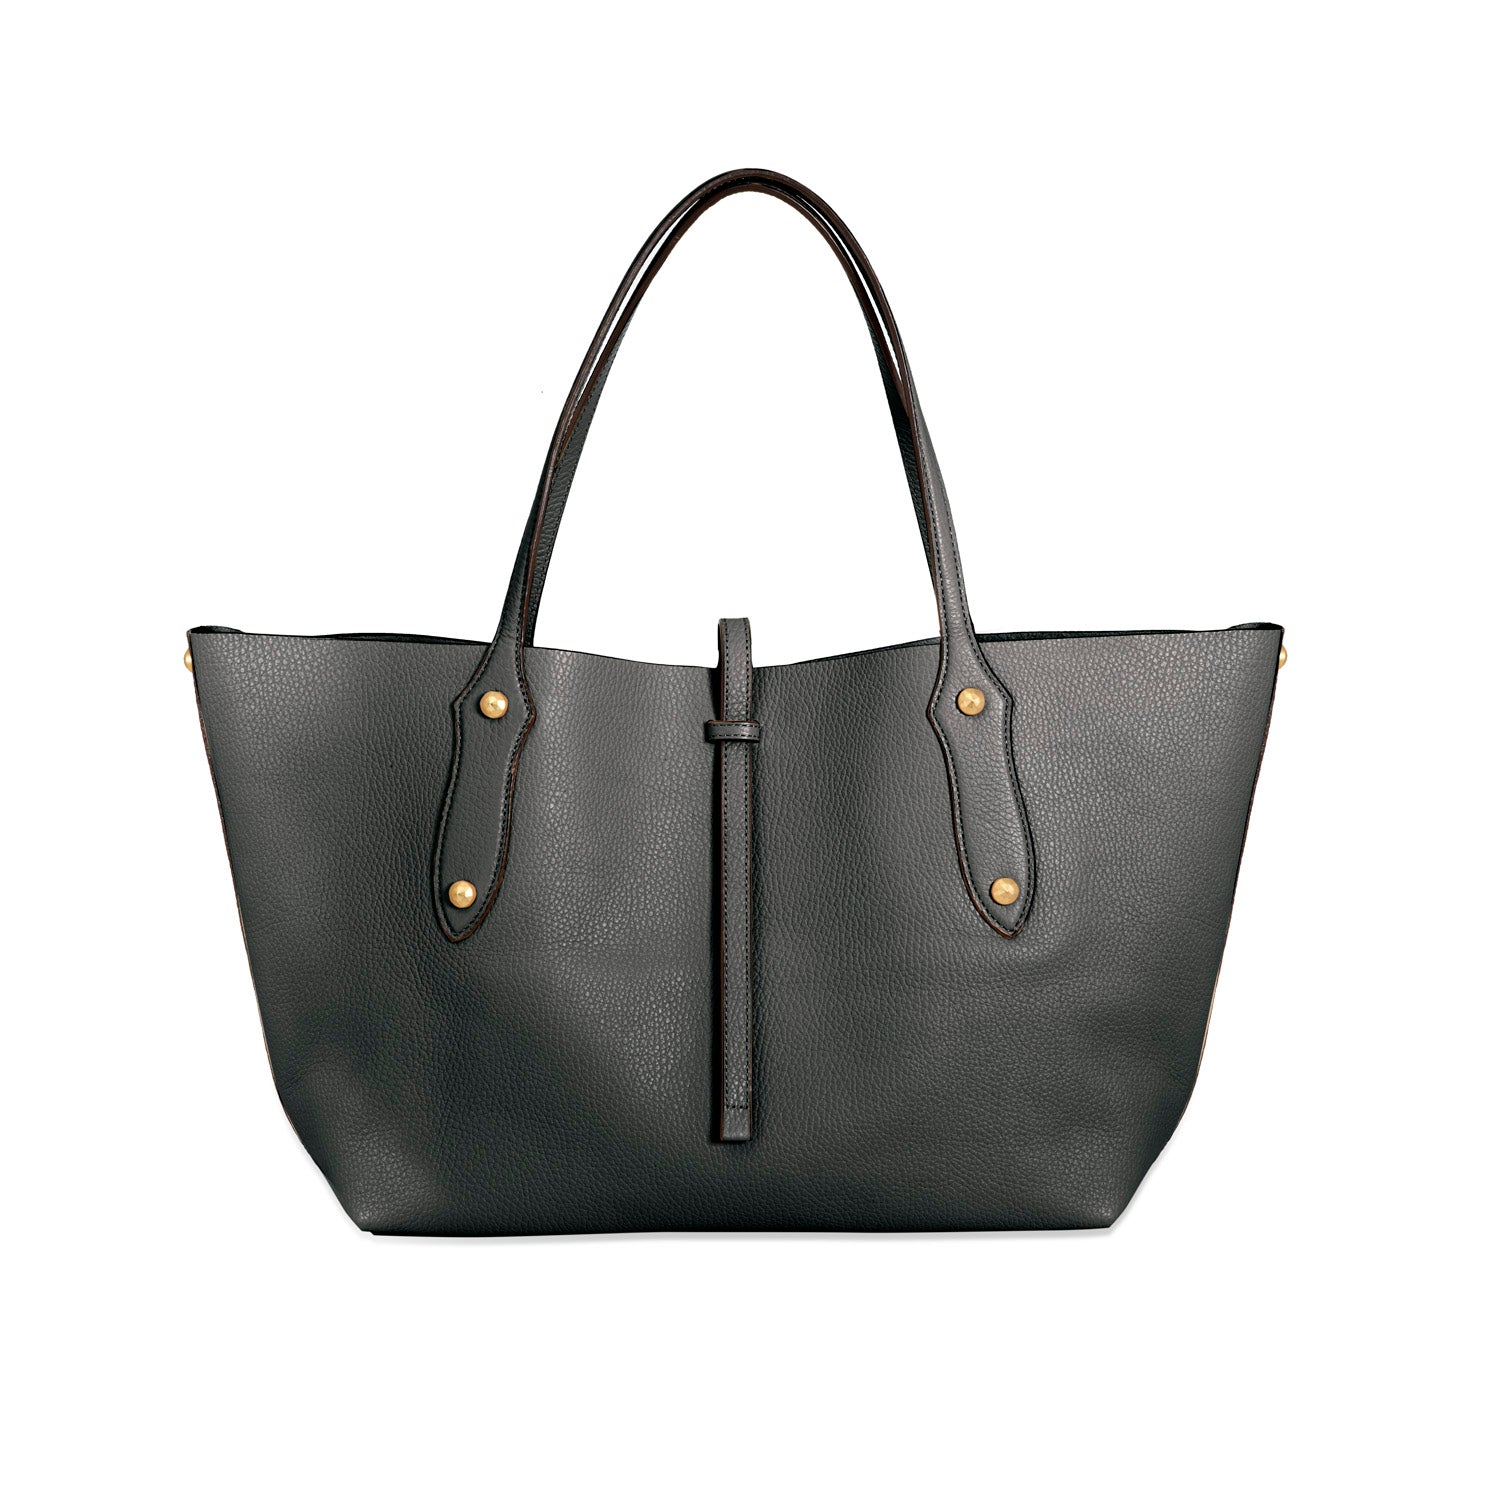 ANNABEL INGALL ISABELLA SMALL TOTE